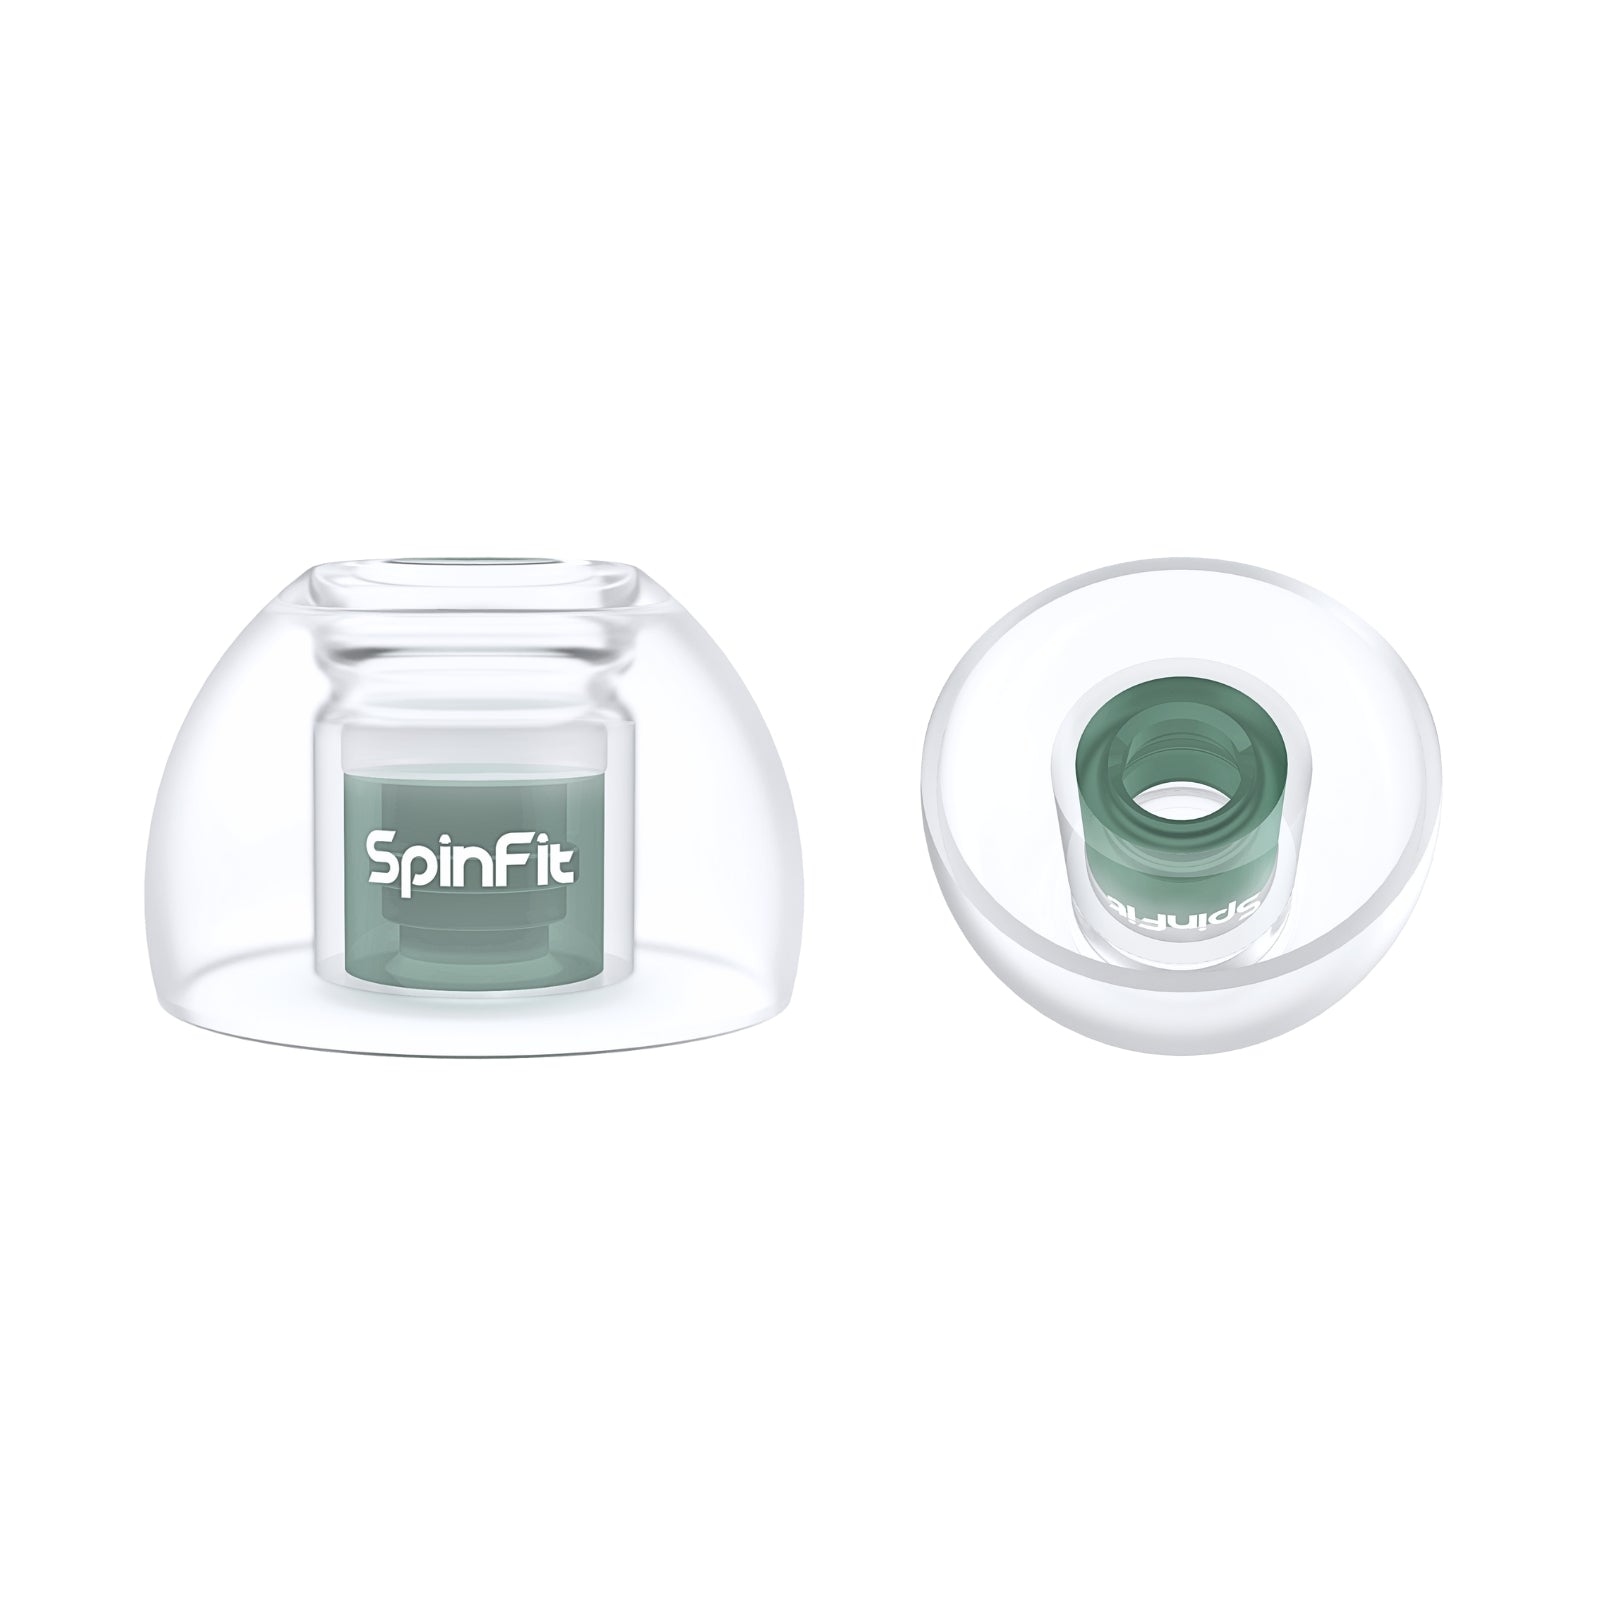 SpinFit Omni Silicone Eartips For IEM & True Wireless Earbuds